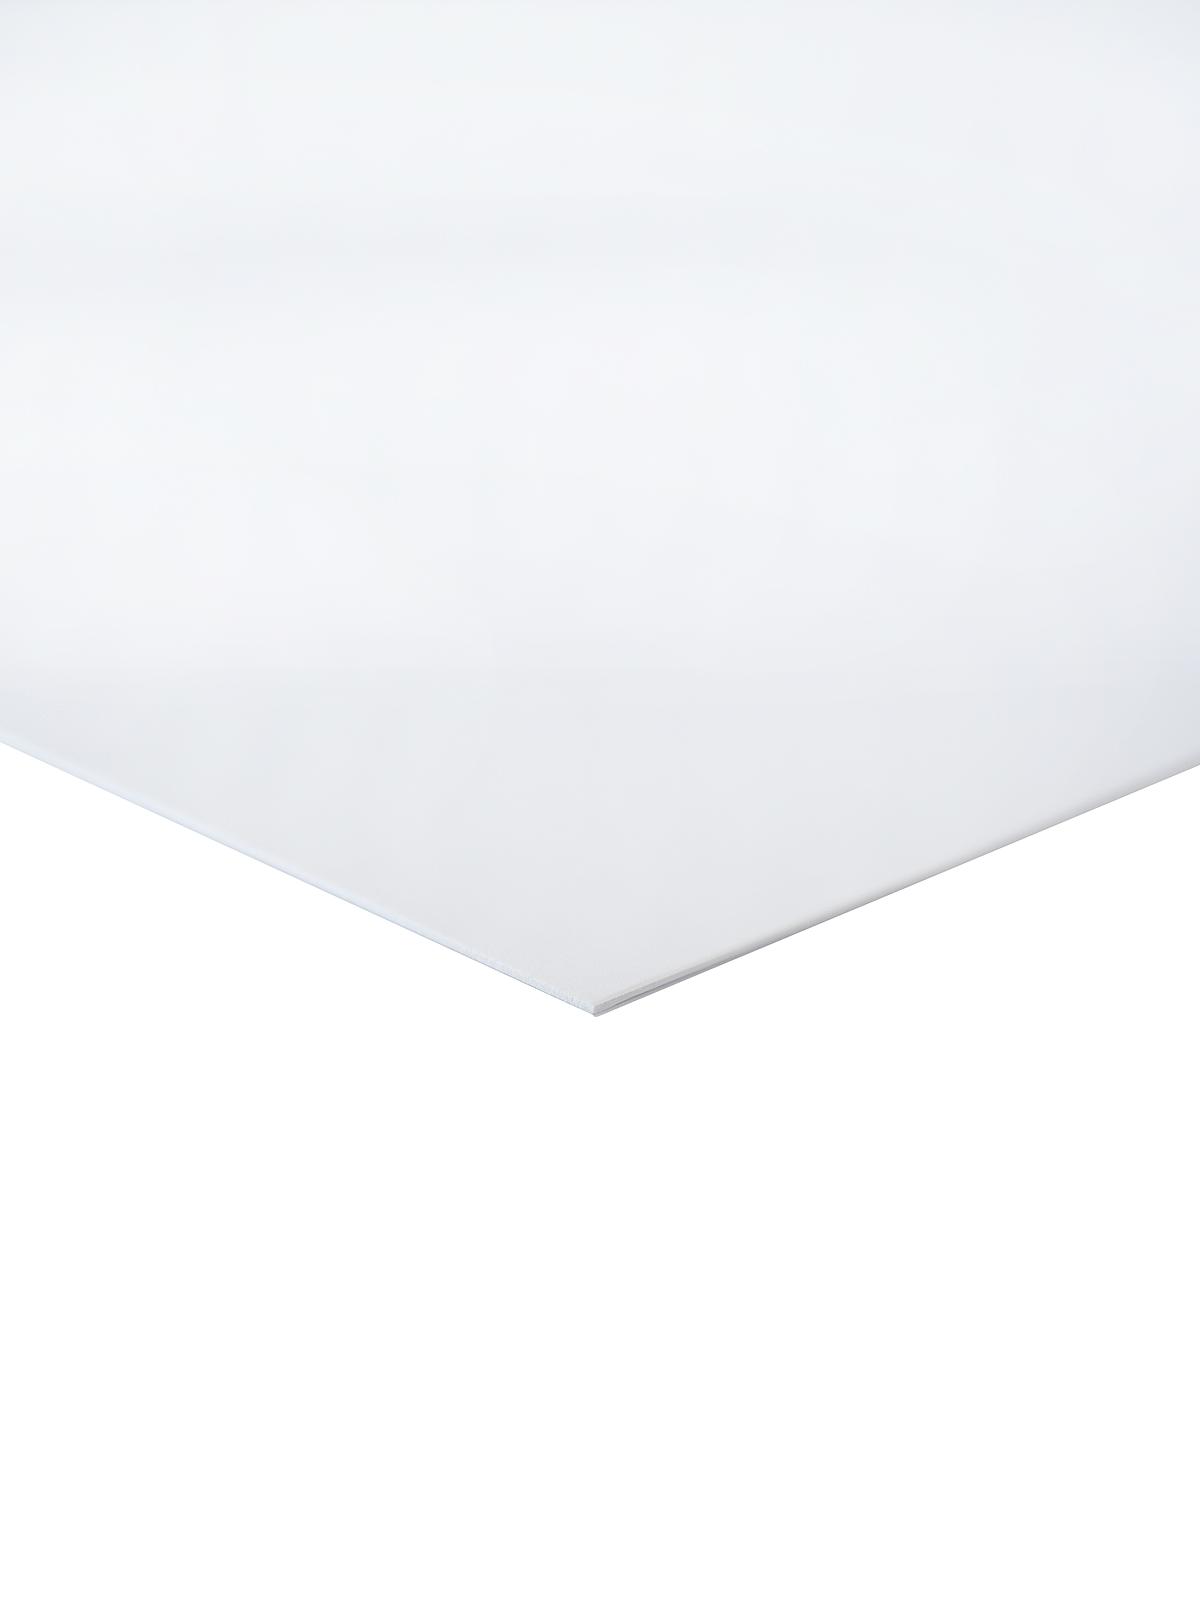 Berkshire Mat Board Smooth White 32 In. X 40 In. White Core